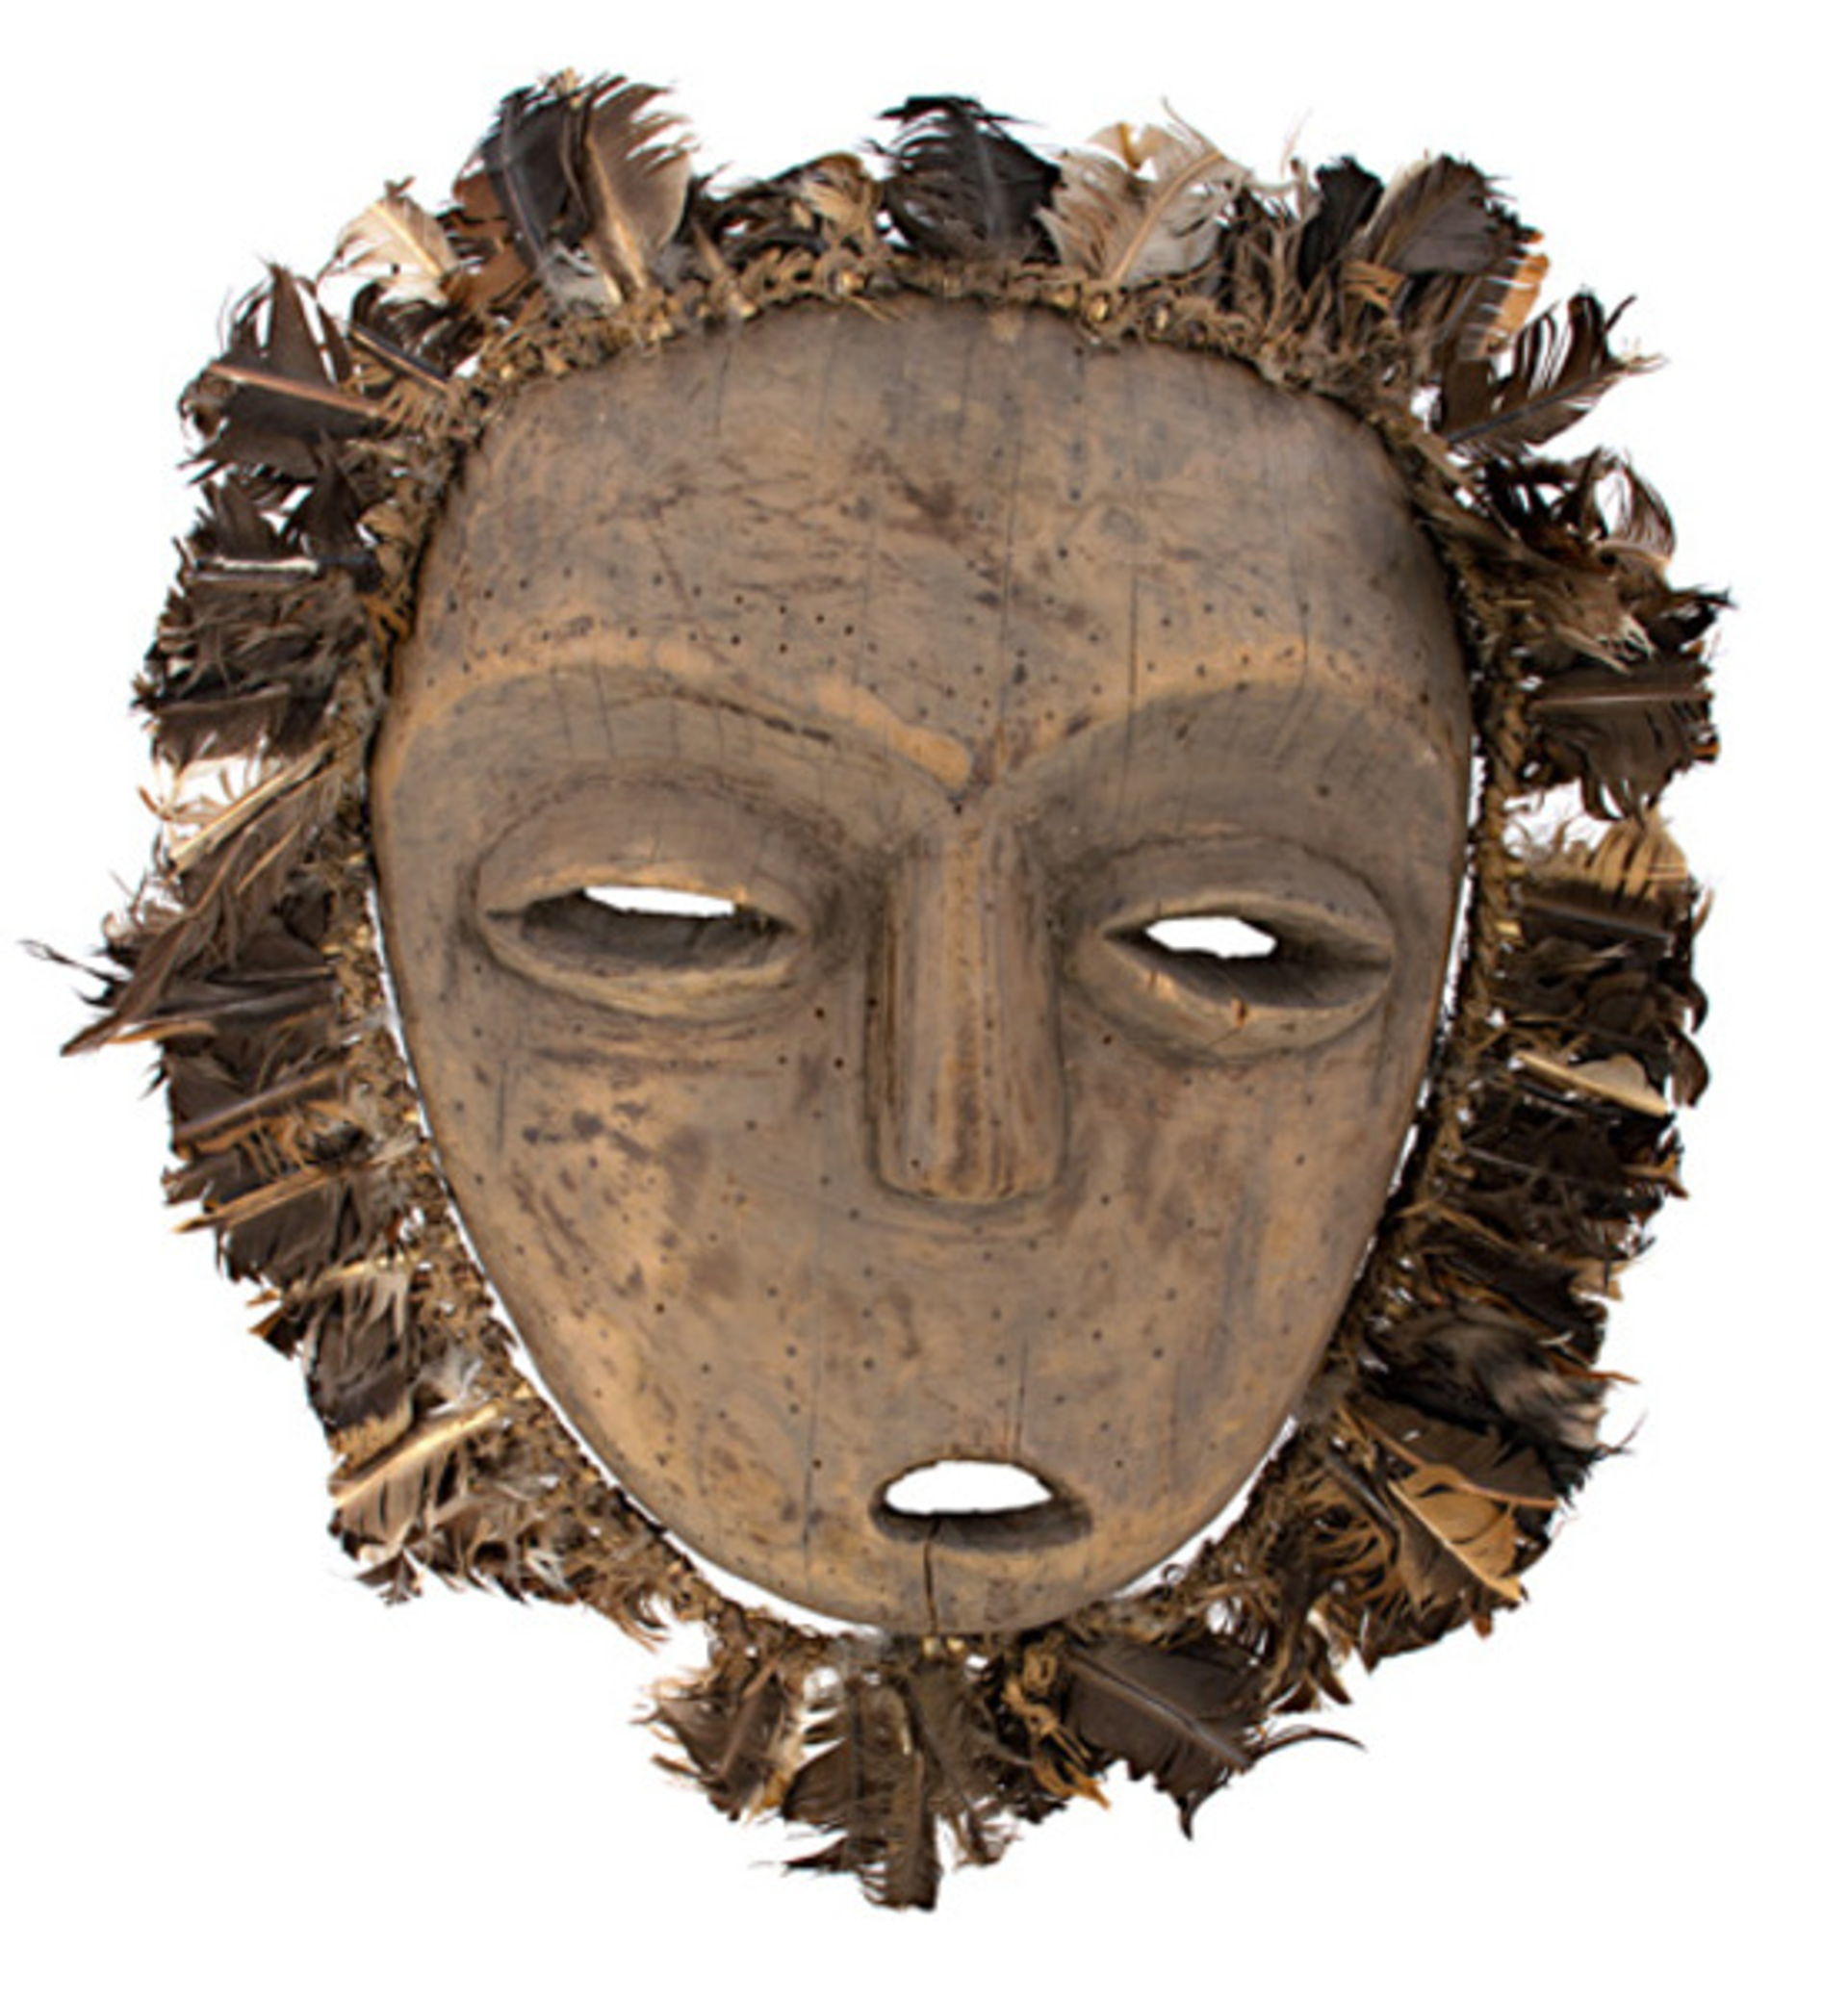 Lega Mask by African